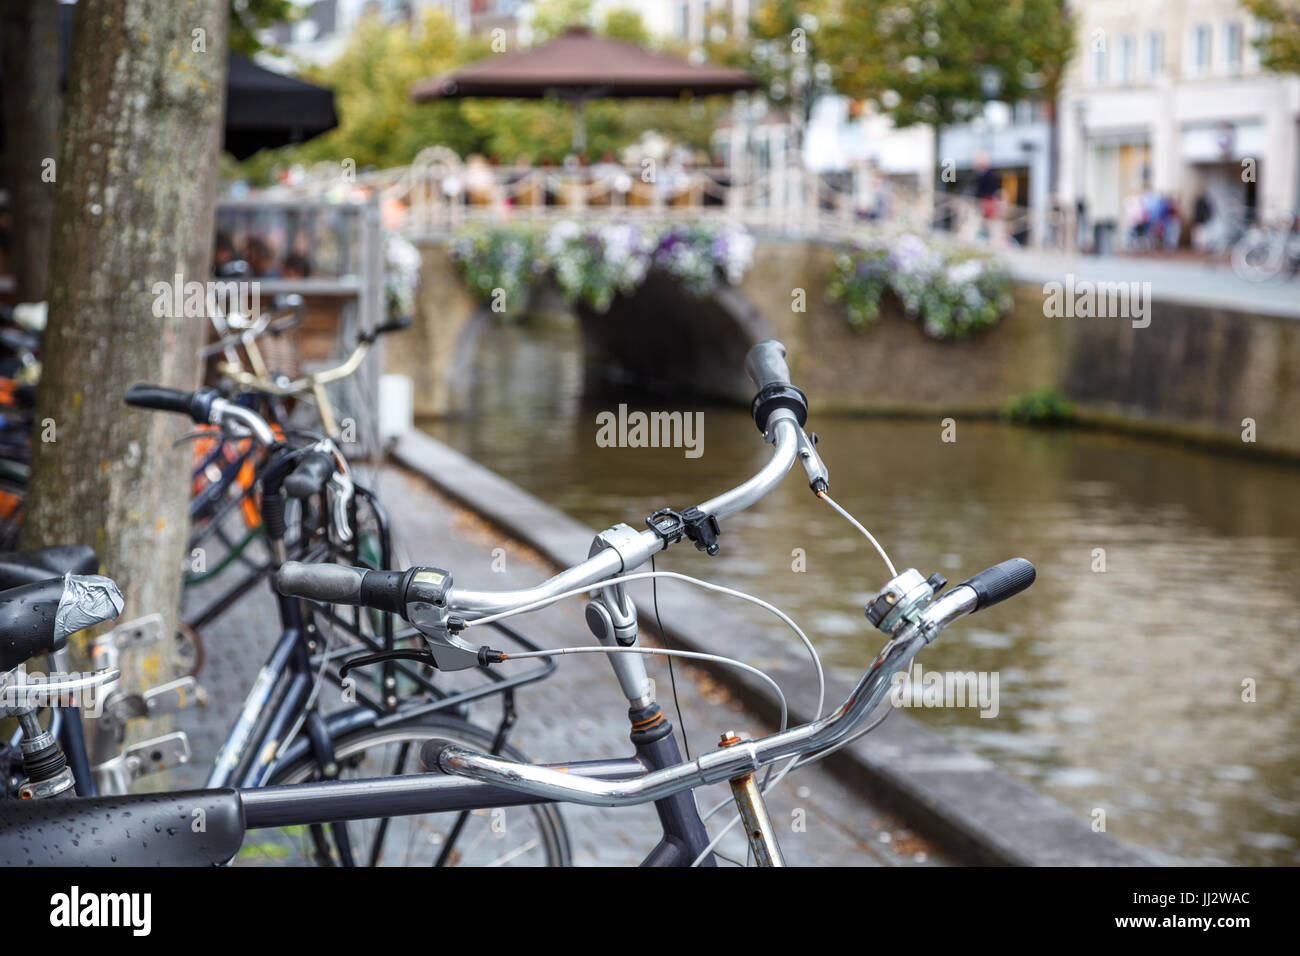 Row of a bicycles  parked in front of a canal in Leeuwarden, Netherlands Stock Photo